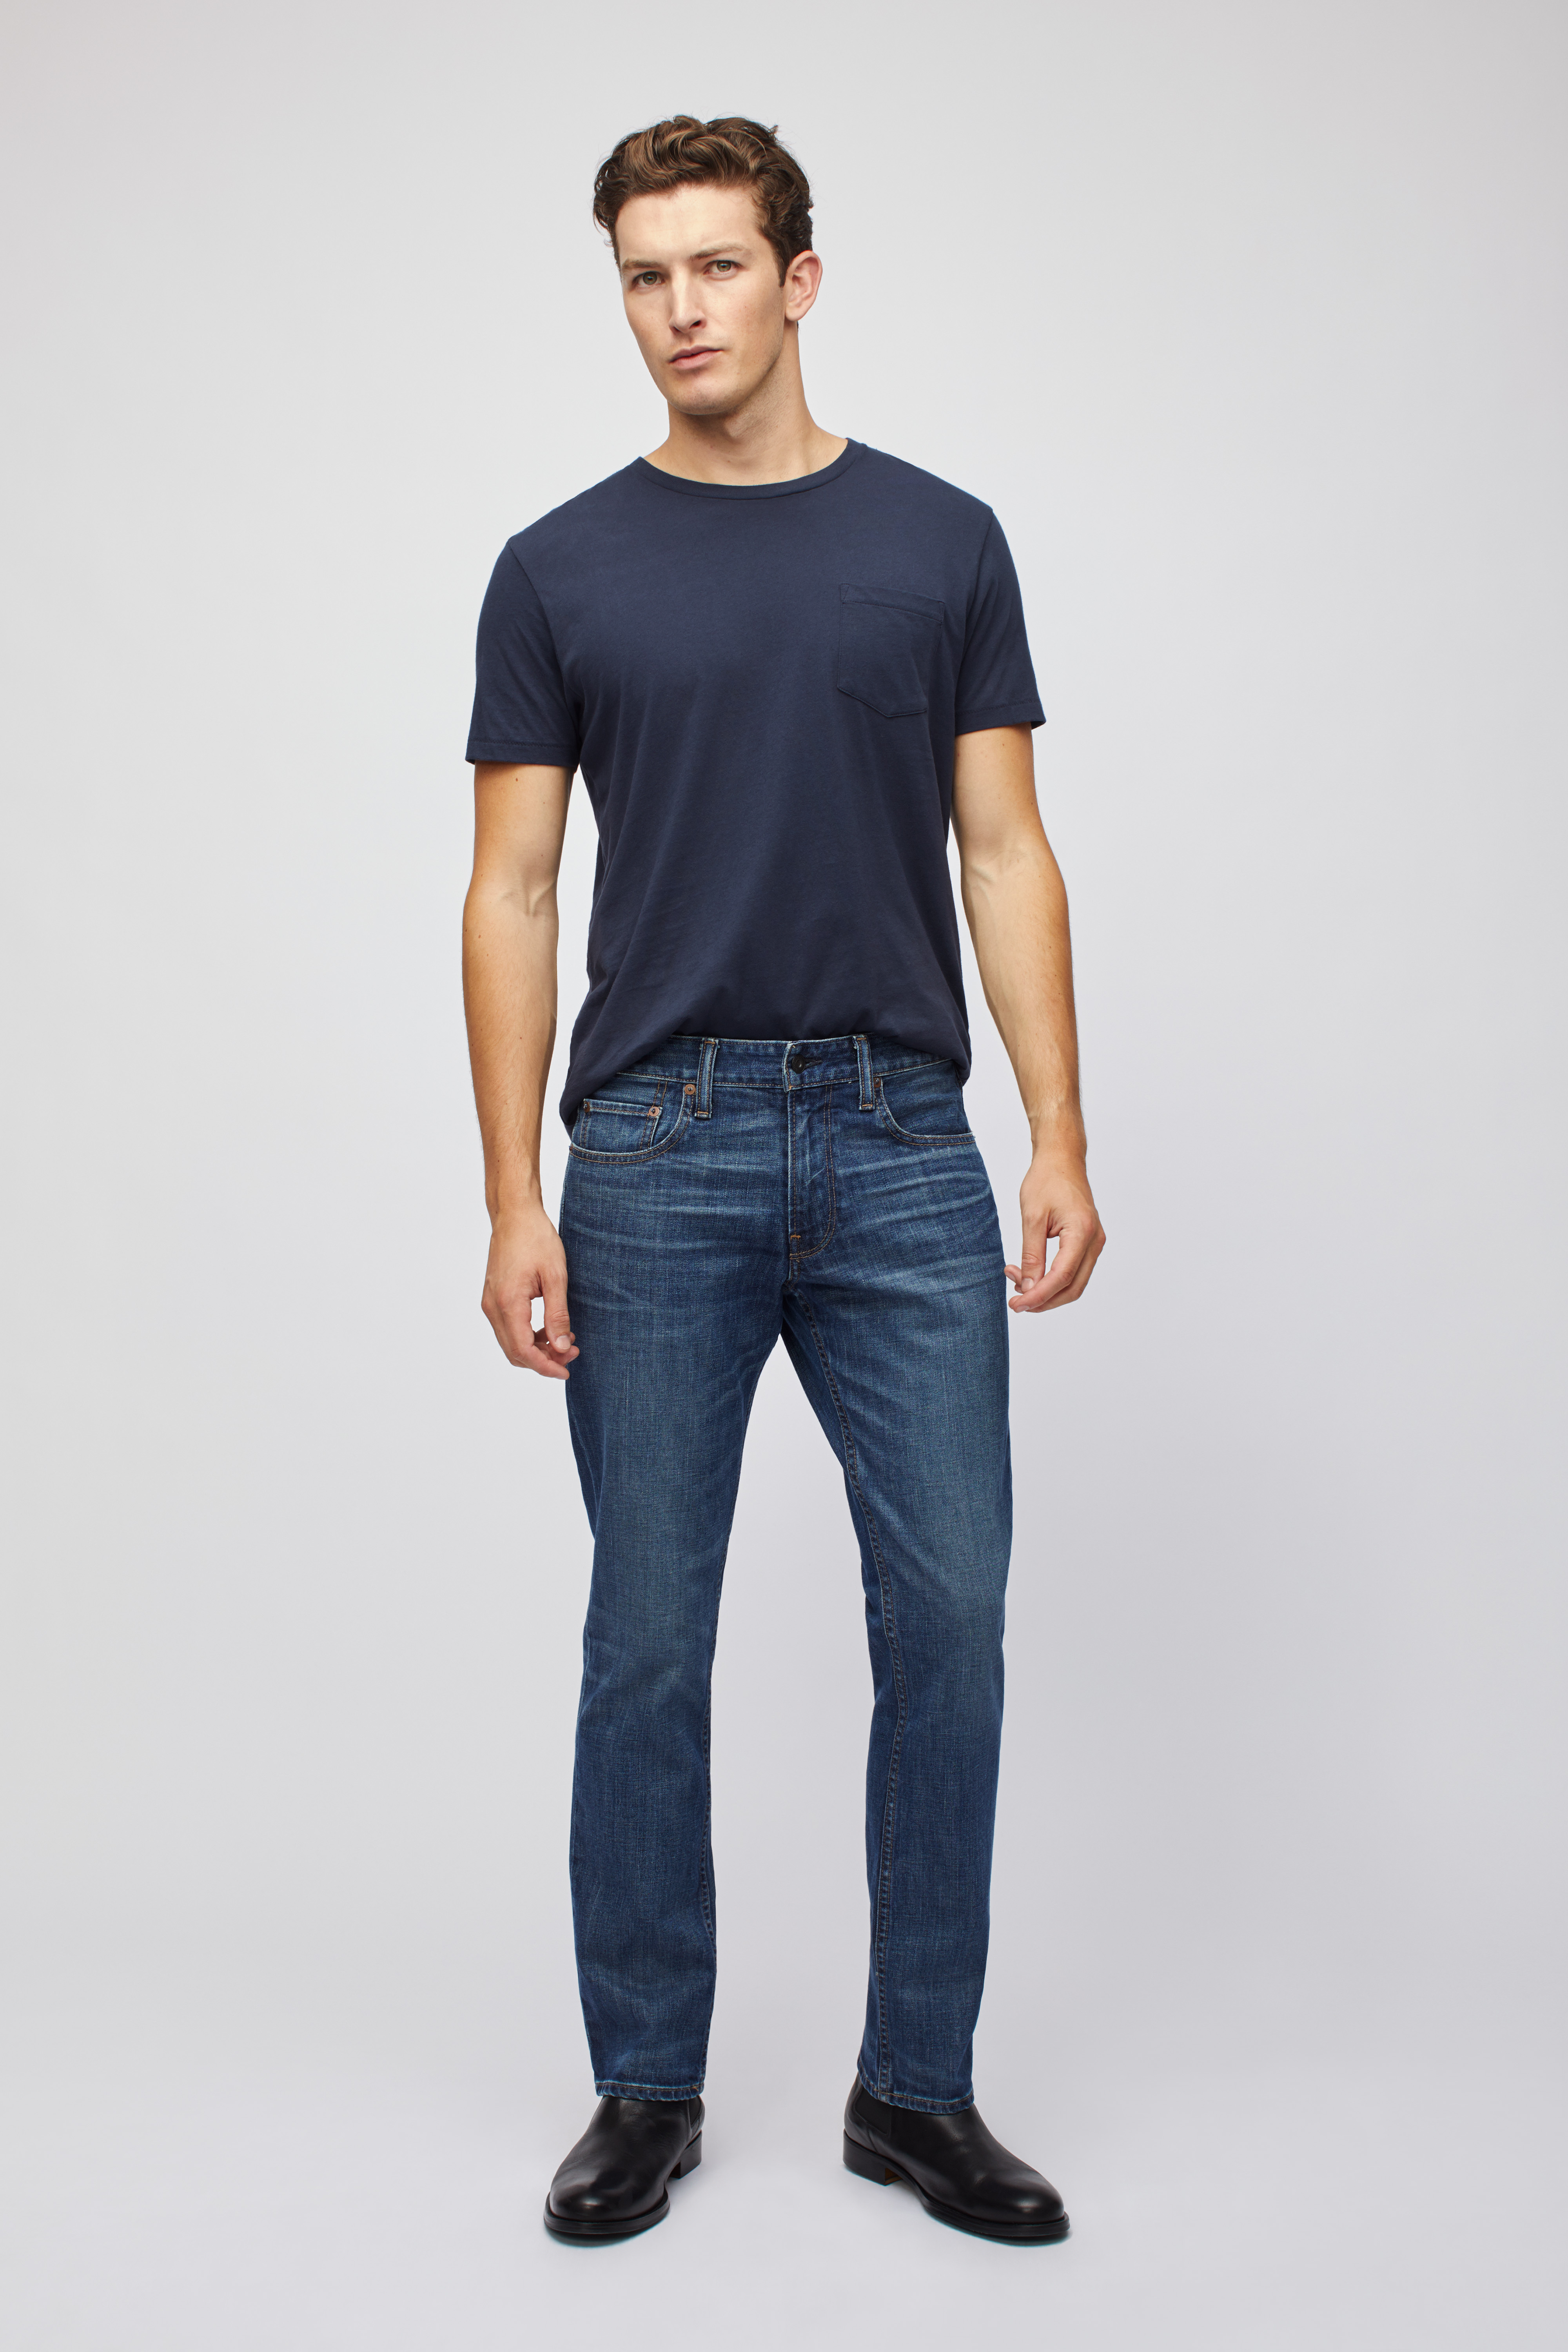 The Blue Jean Classic Denim In Multiple Washes Bonobos